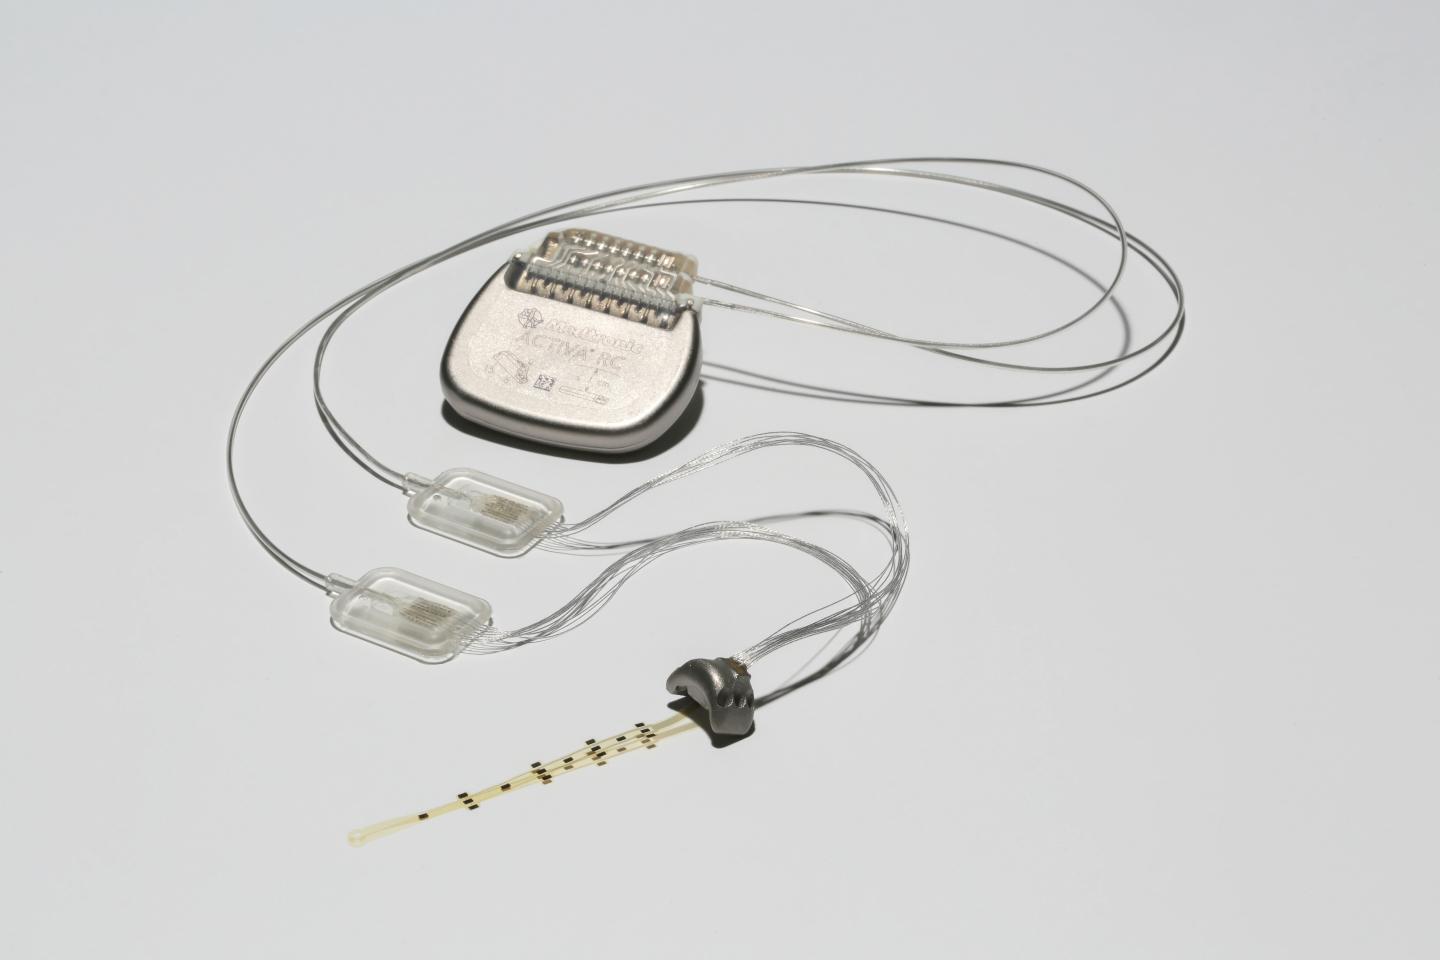 Components of the Brain-Spine Interface